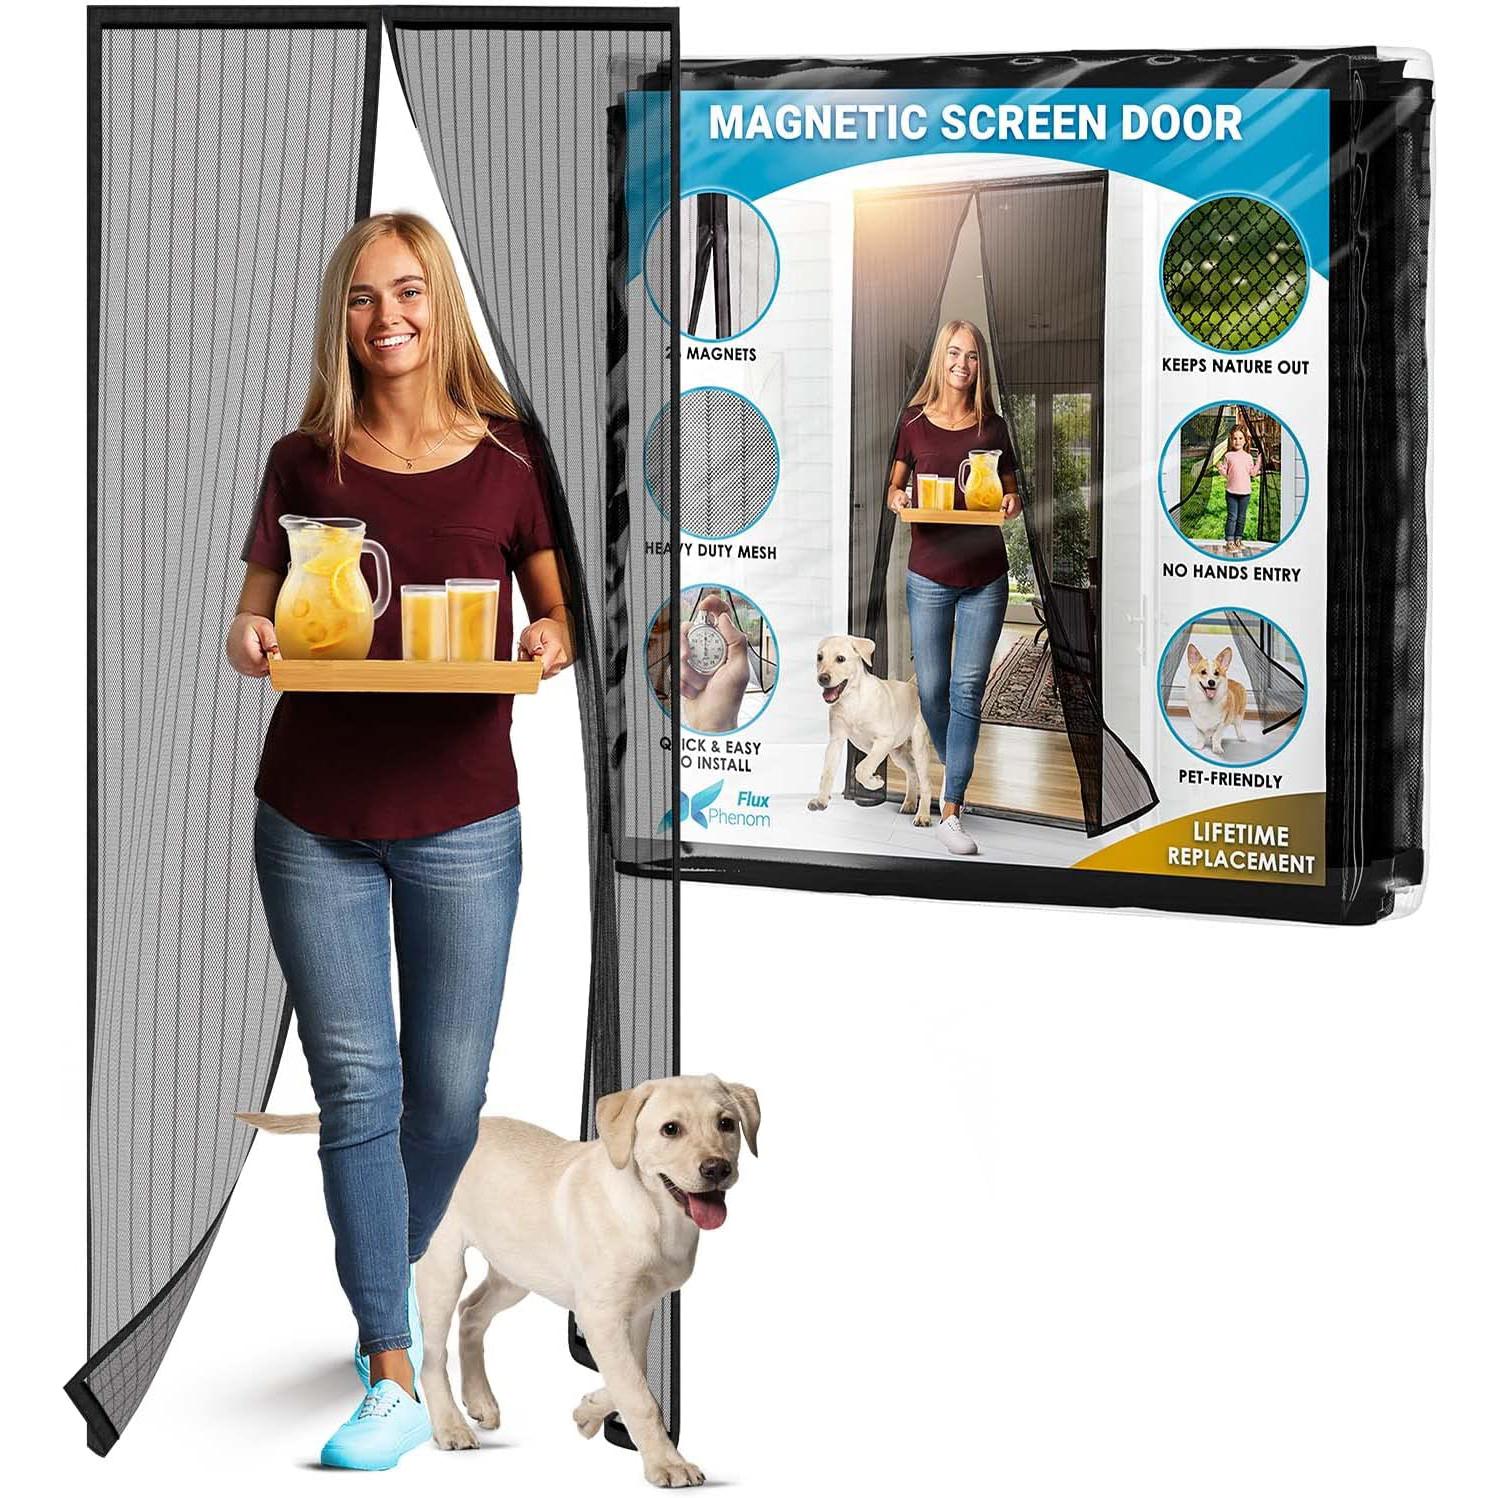 Easy to Install Magnetic Screen Door for $11.99